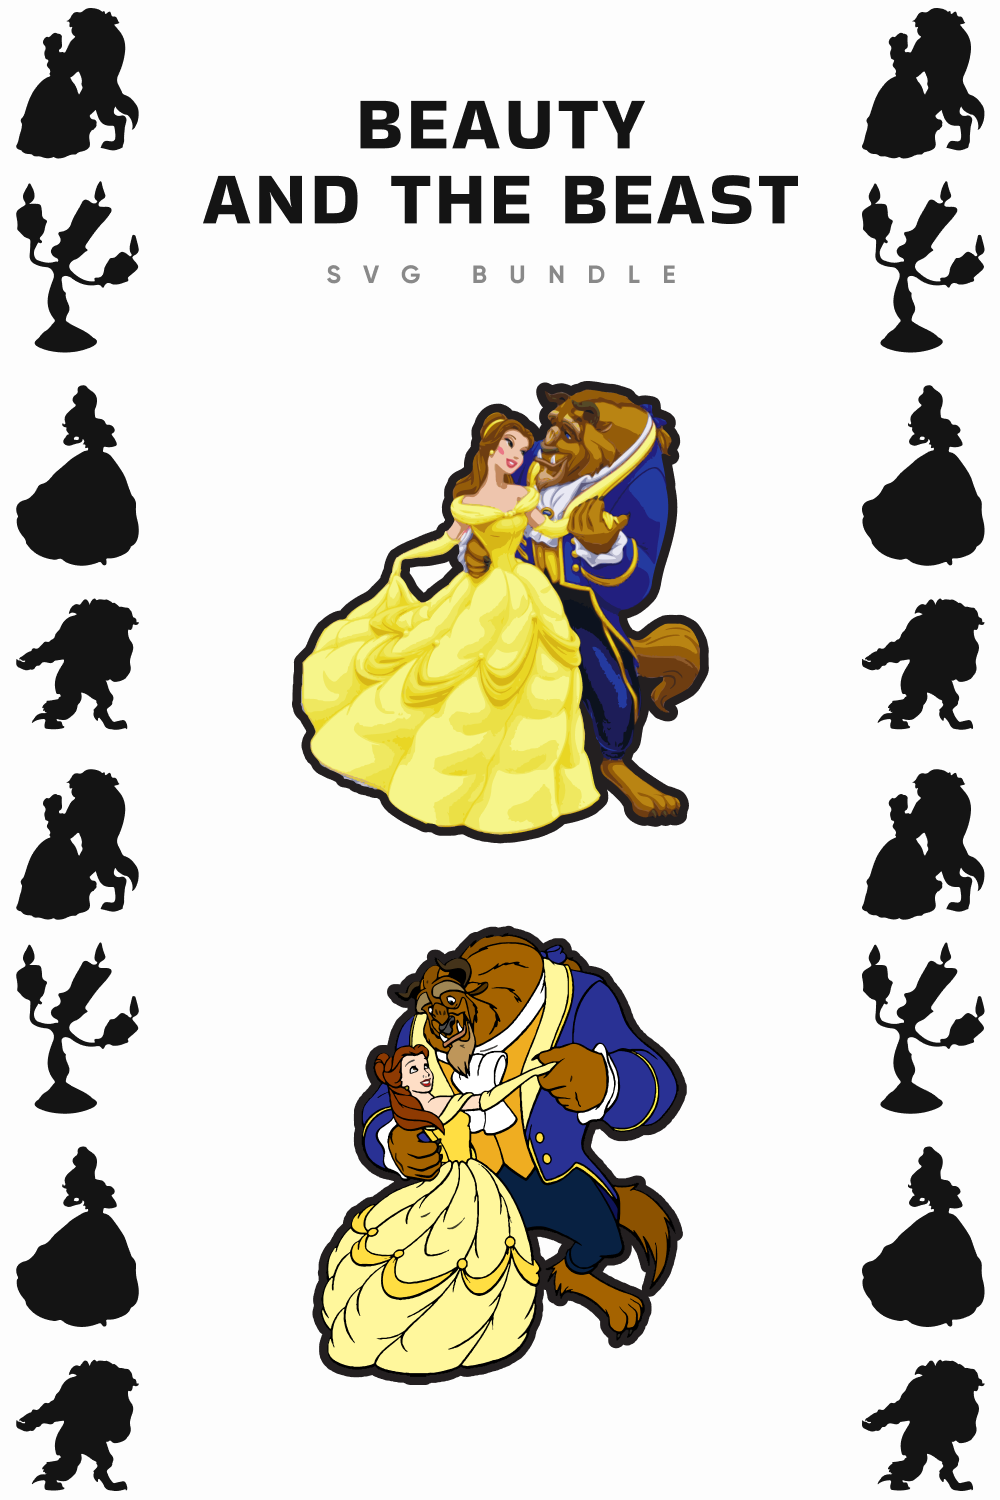 Beauty and the Beast SVG Files pinterest image.